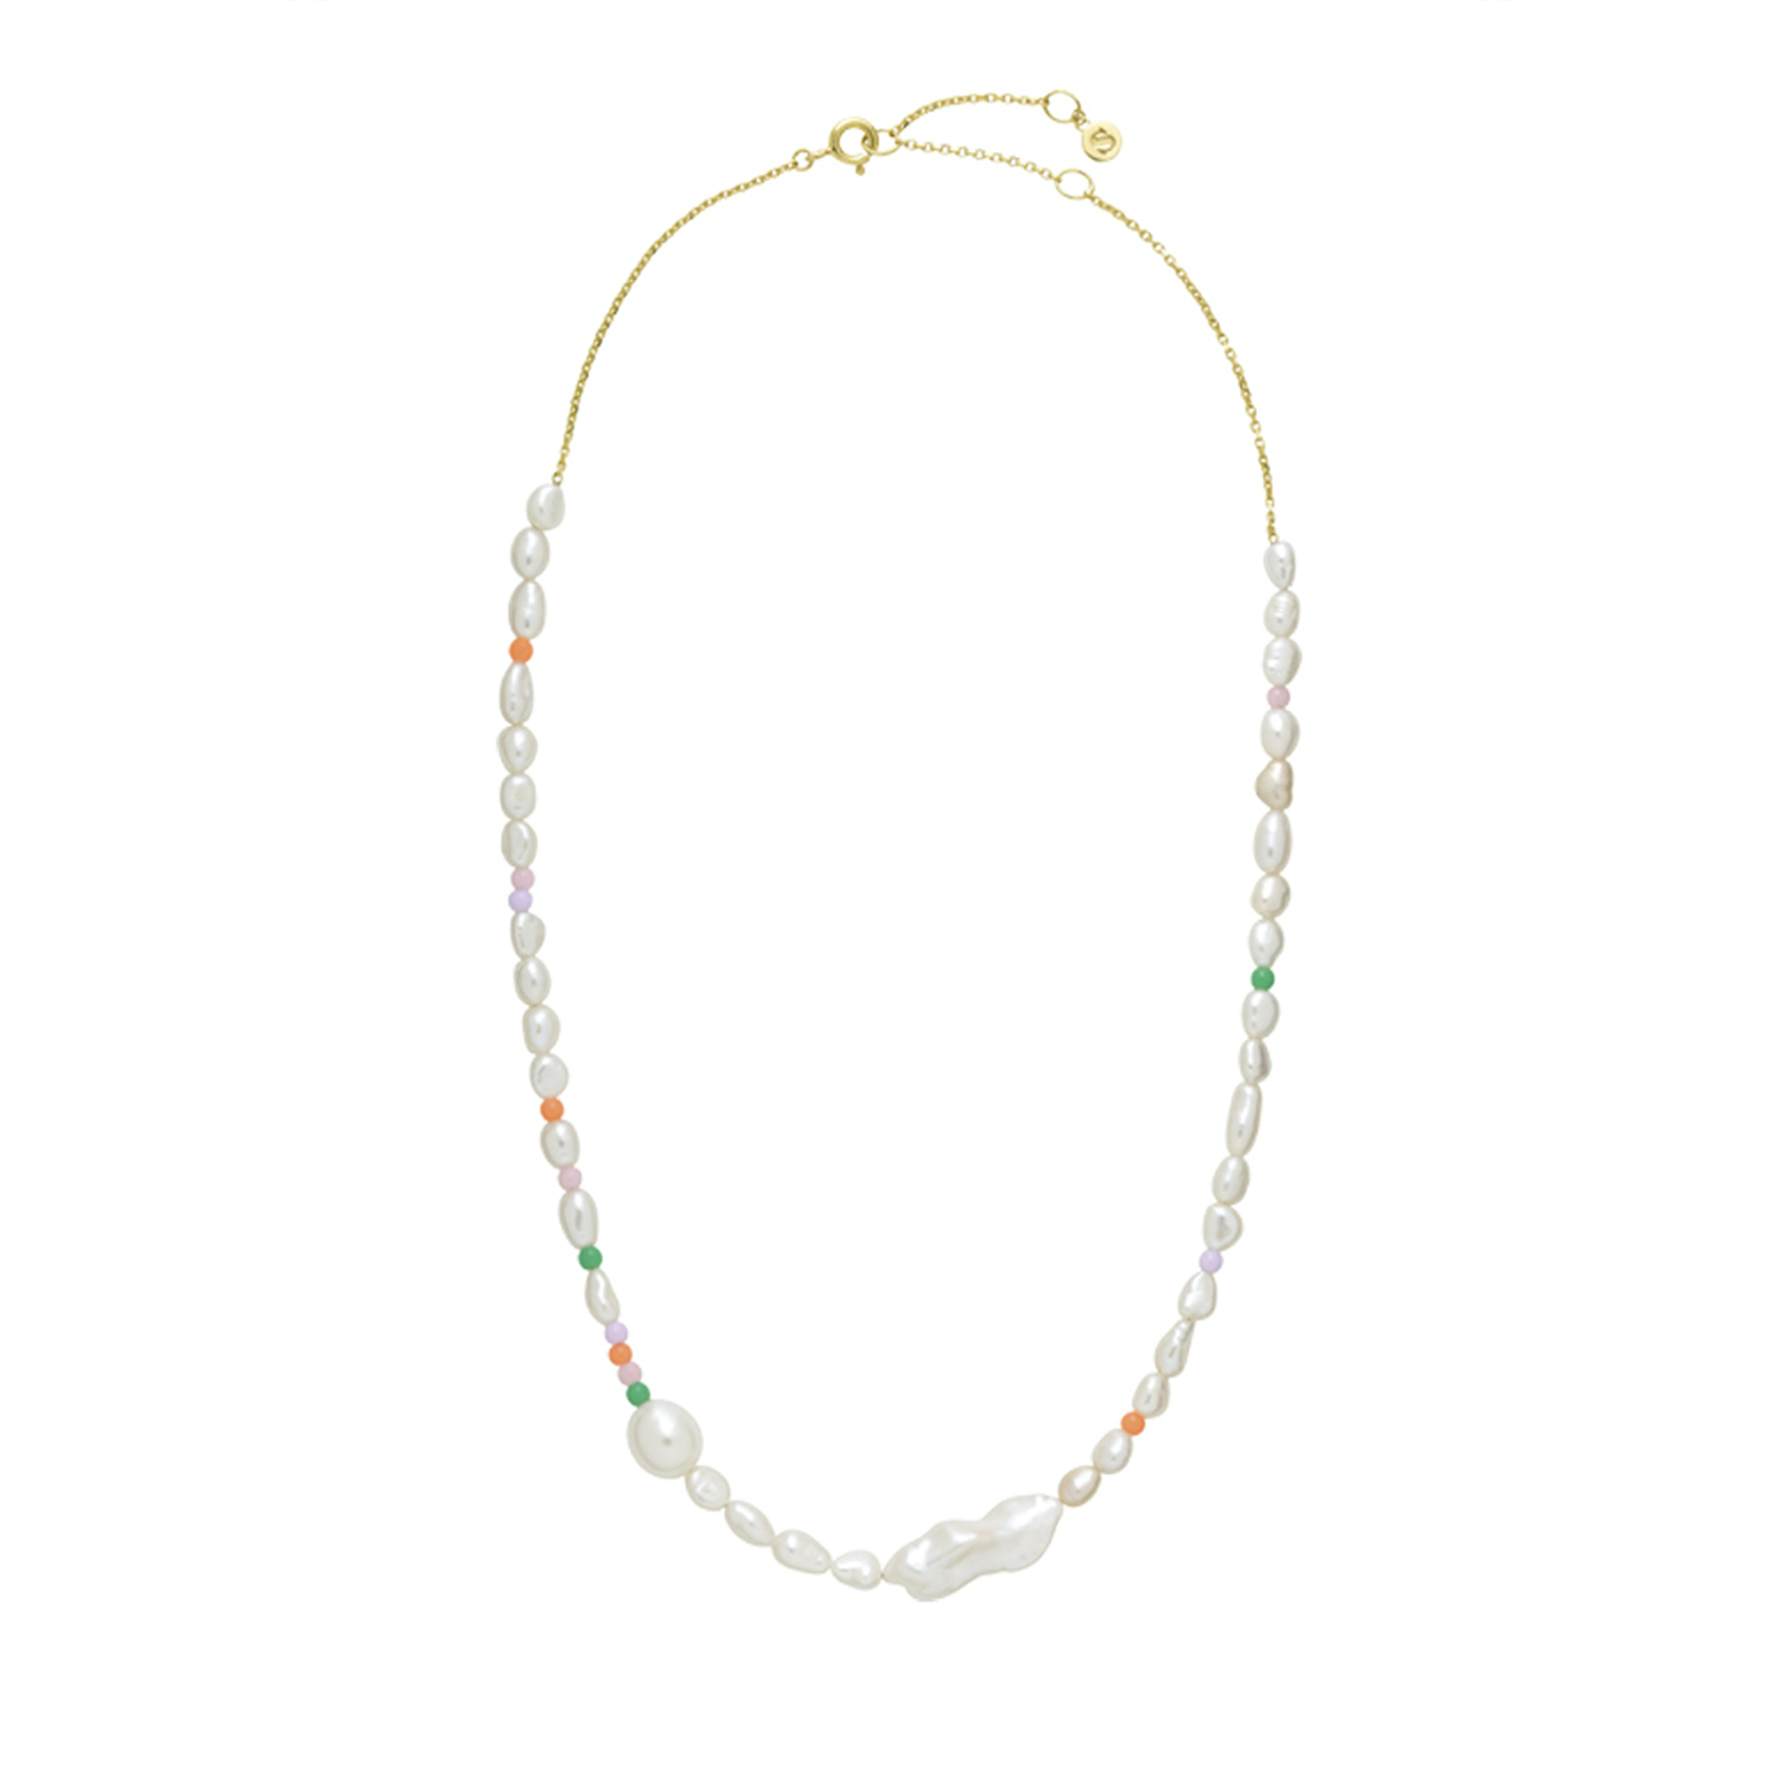 Anne-Sofie Krab x Sistie Pearl Necklace from Sistie in Goldplated-Silver Sterling 925